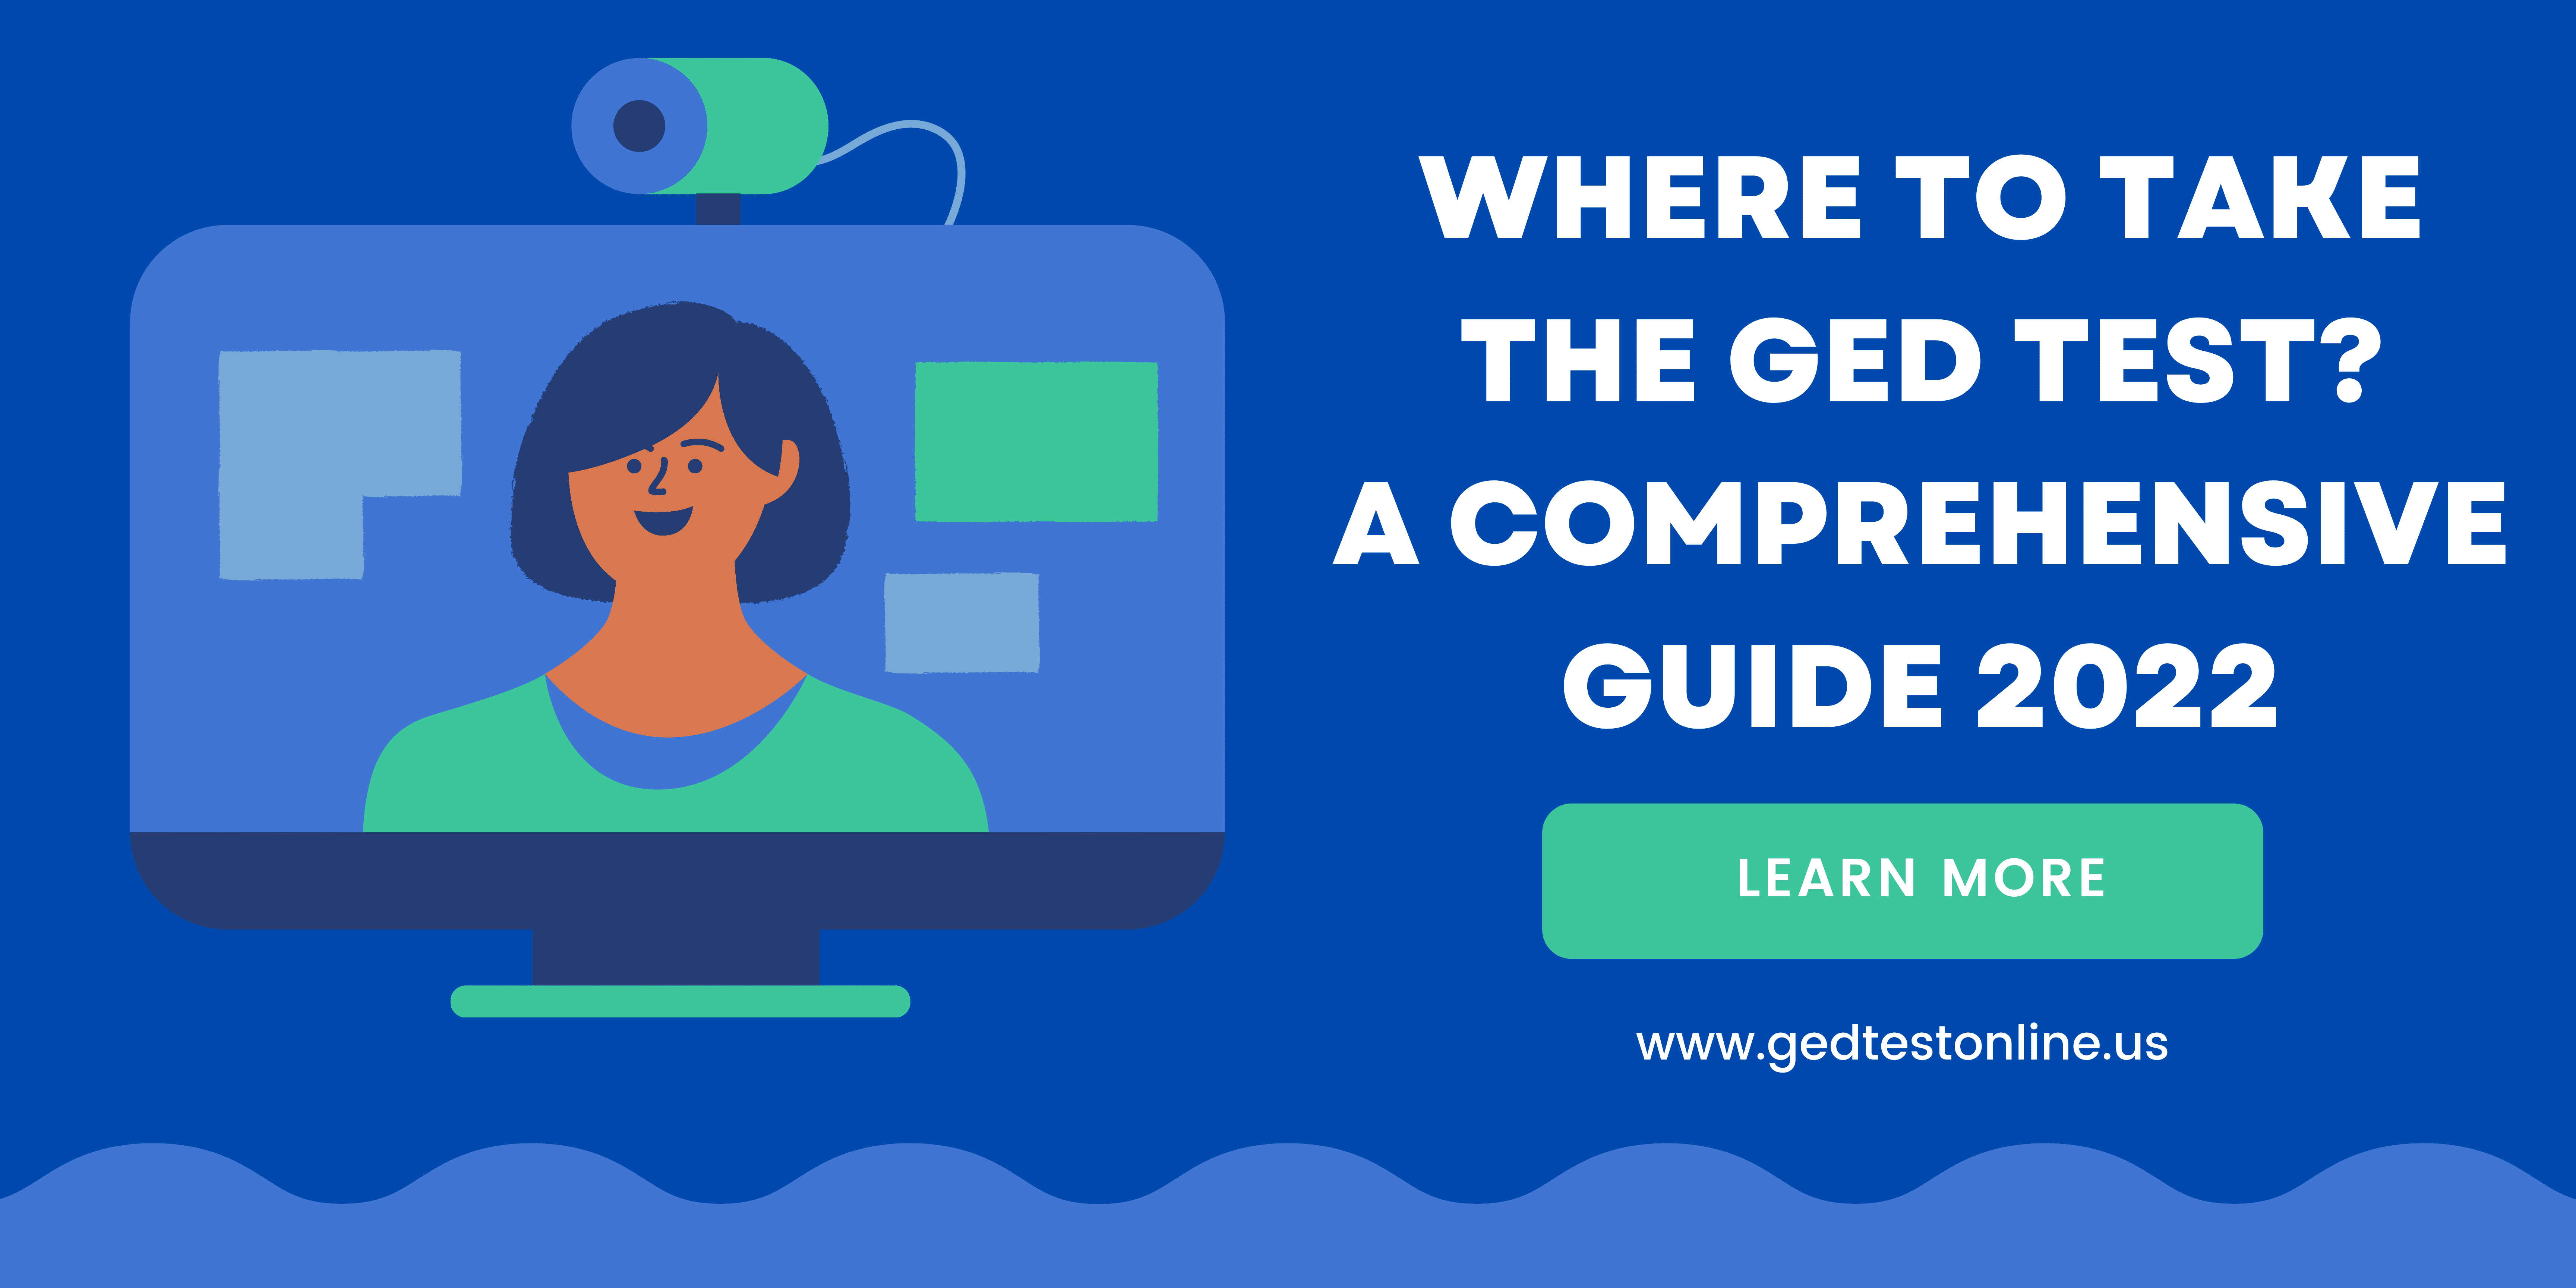 Where to Take the GED Test? A Comprehensive Guide 2022